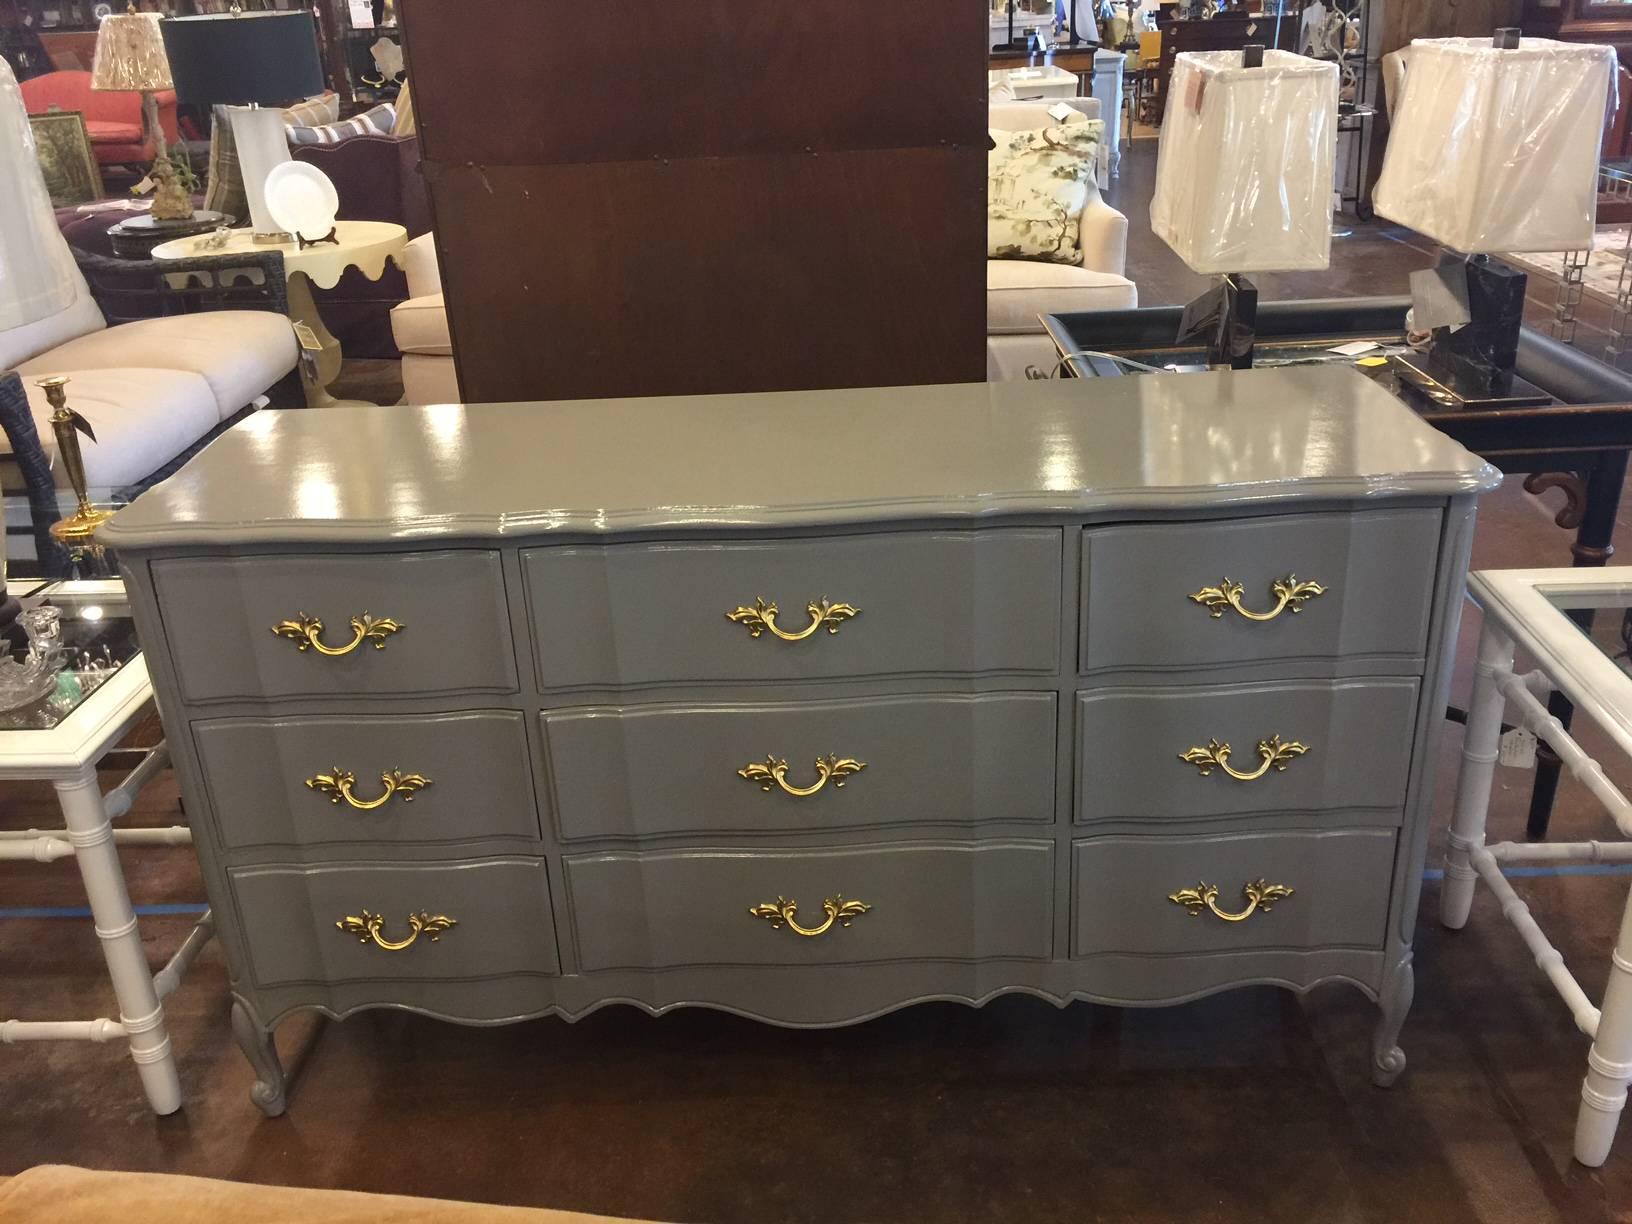 This vintage Dixie dresser can also serve a credenza in a living or dining room. Nine drawers provide plenty of storage. The piece has been professionally lacquered in a BM gray and the hardware has been gilded. The curvy lines provide a French feel.